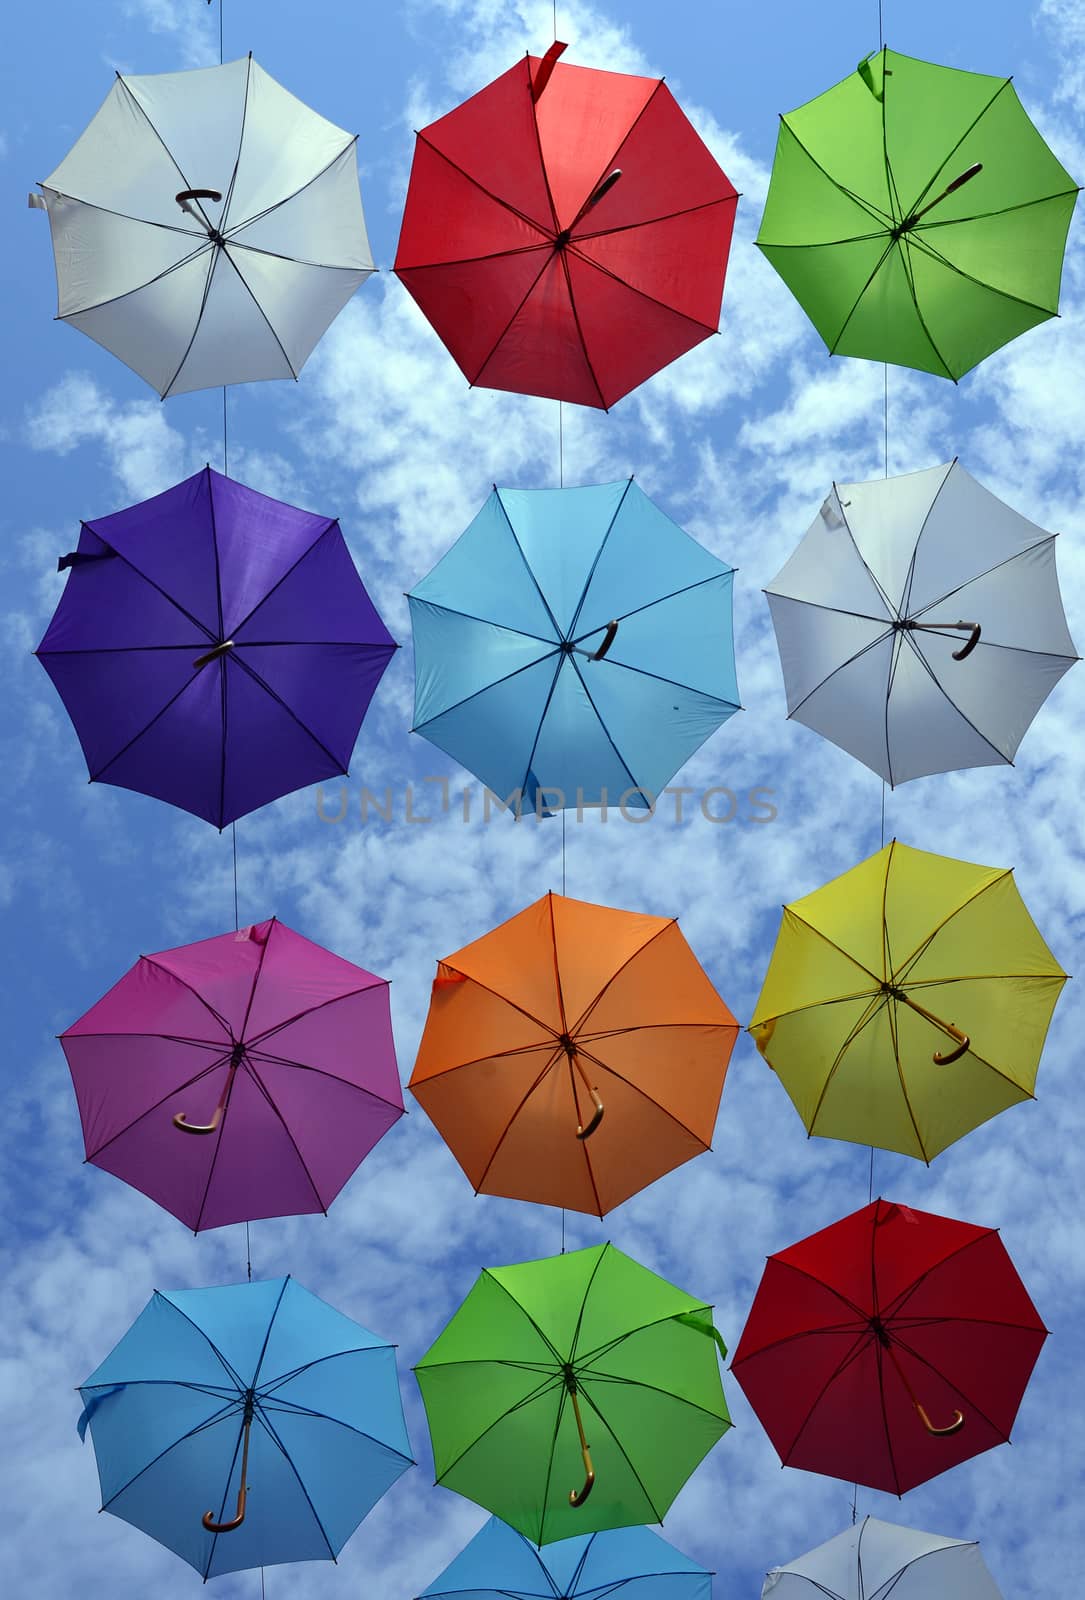 many colorful hanged umbrella against blue sky